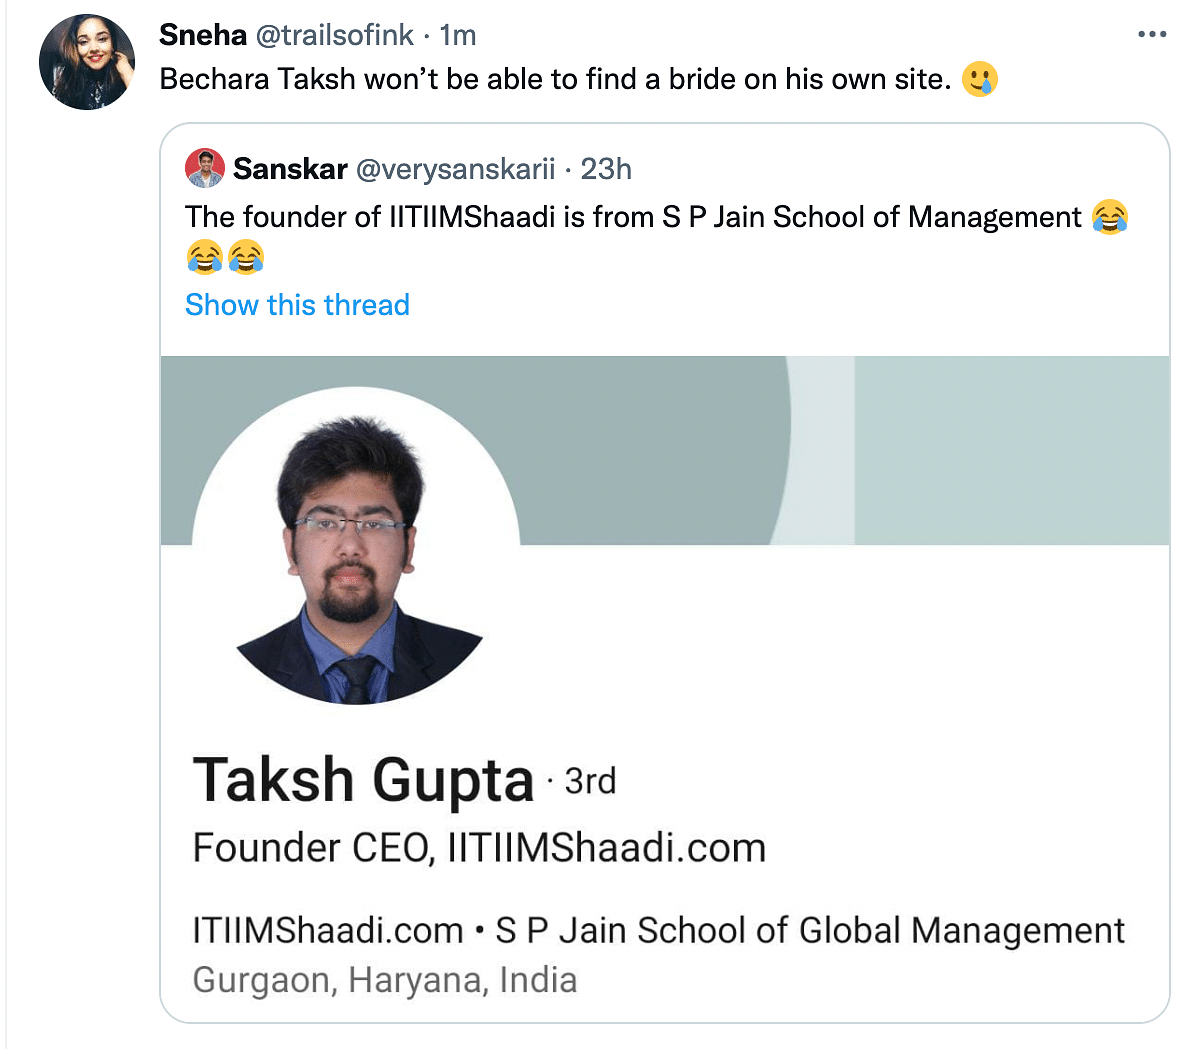 Taksh Gupta is from SP Jain School of Global Management, and Twitter says the irony is real.